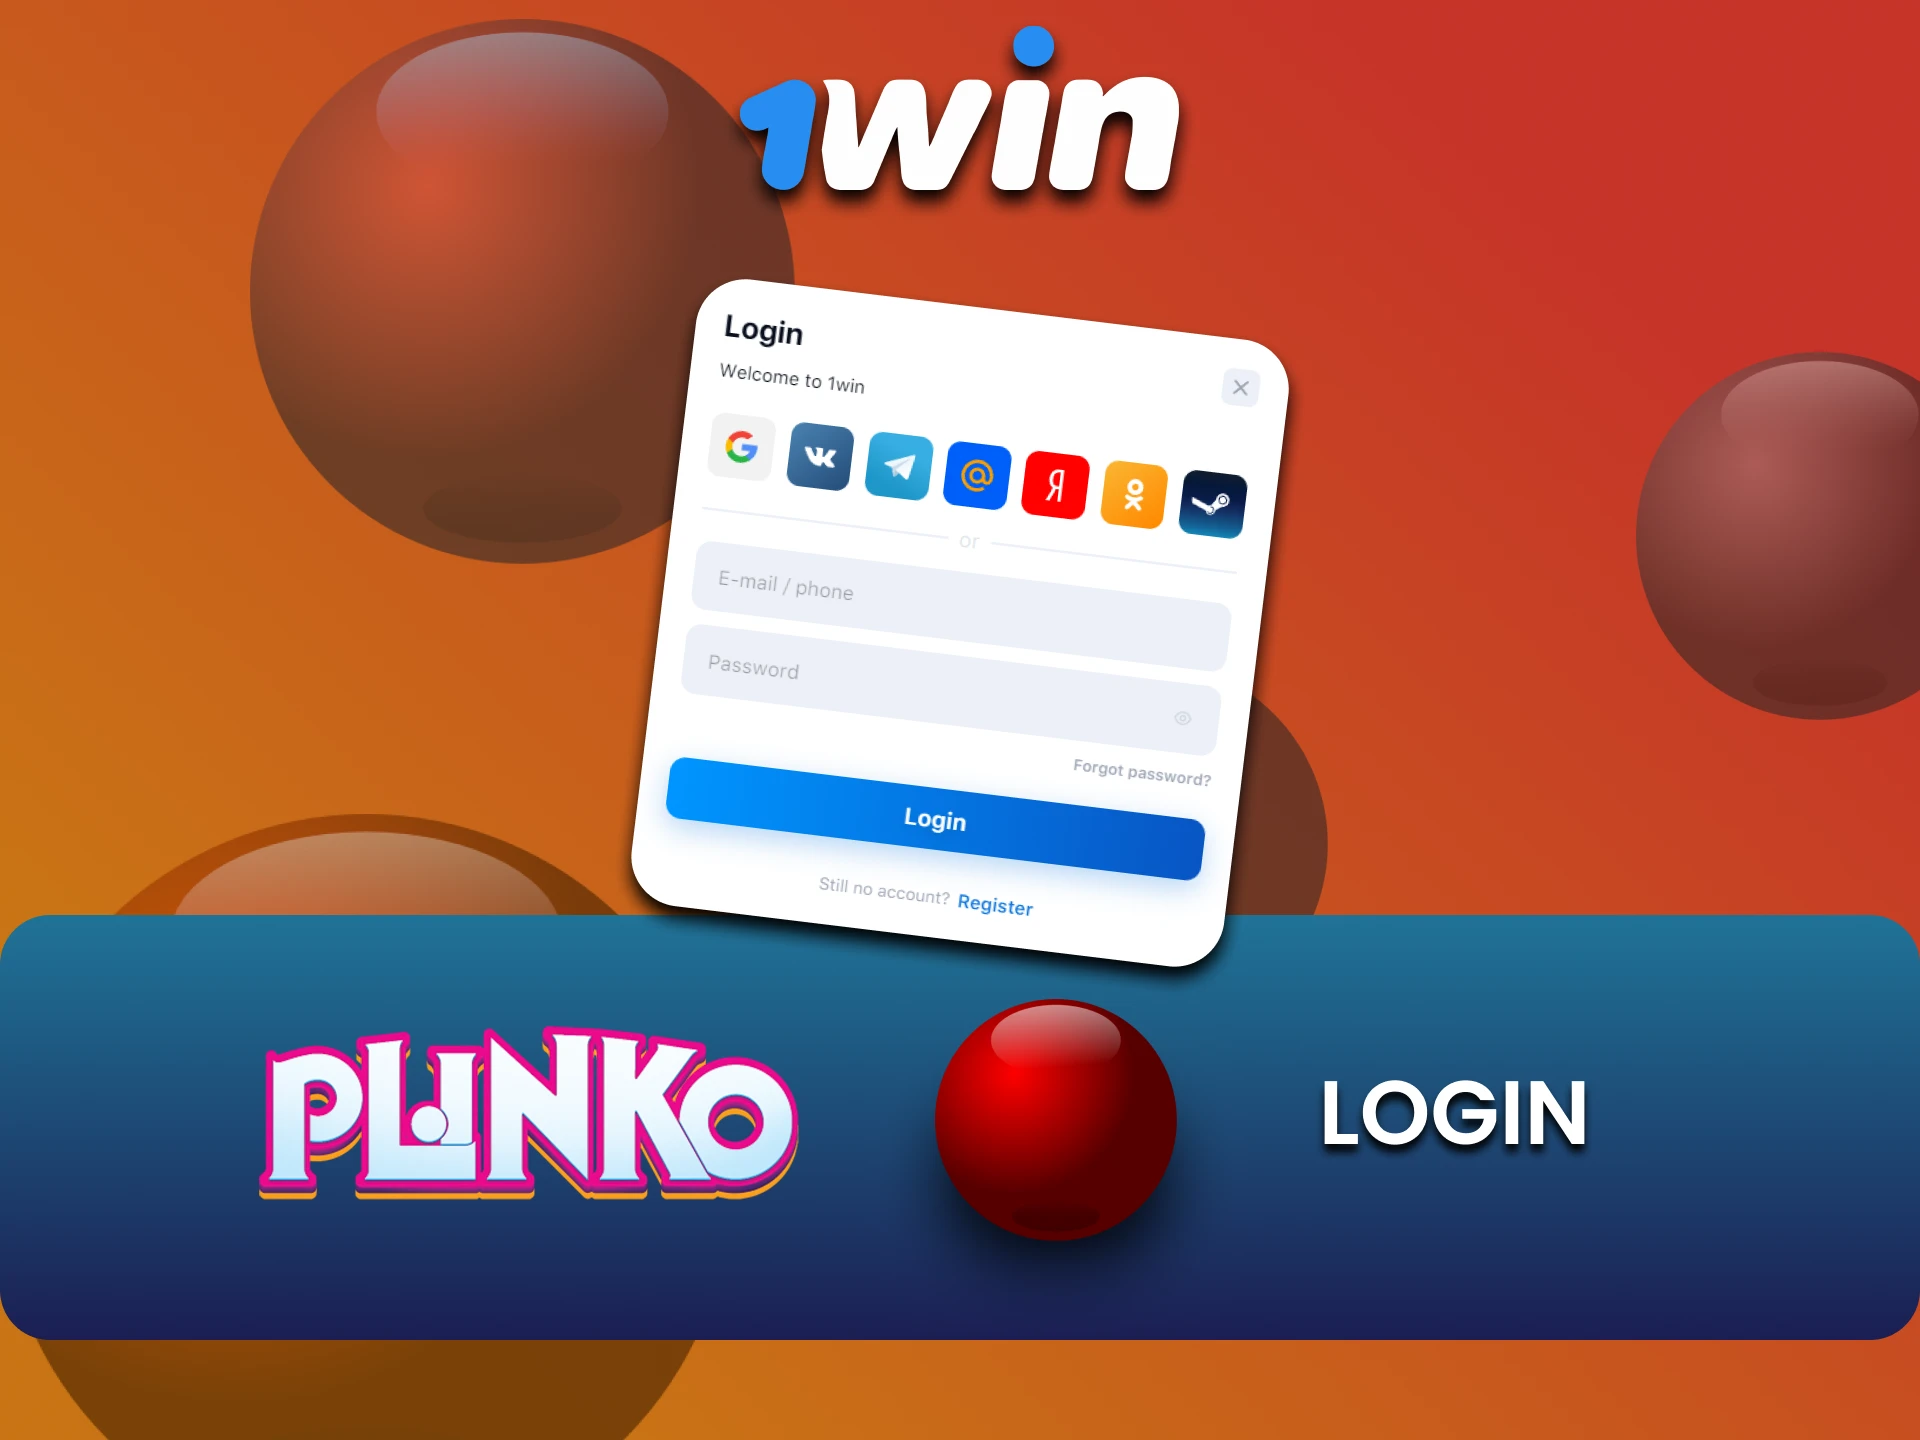 Log into your personal account at 1win and start playing Plinko.